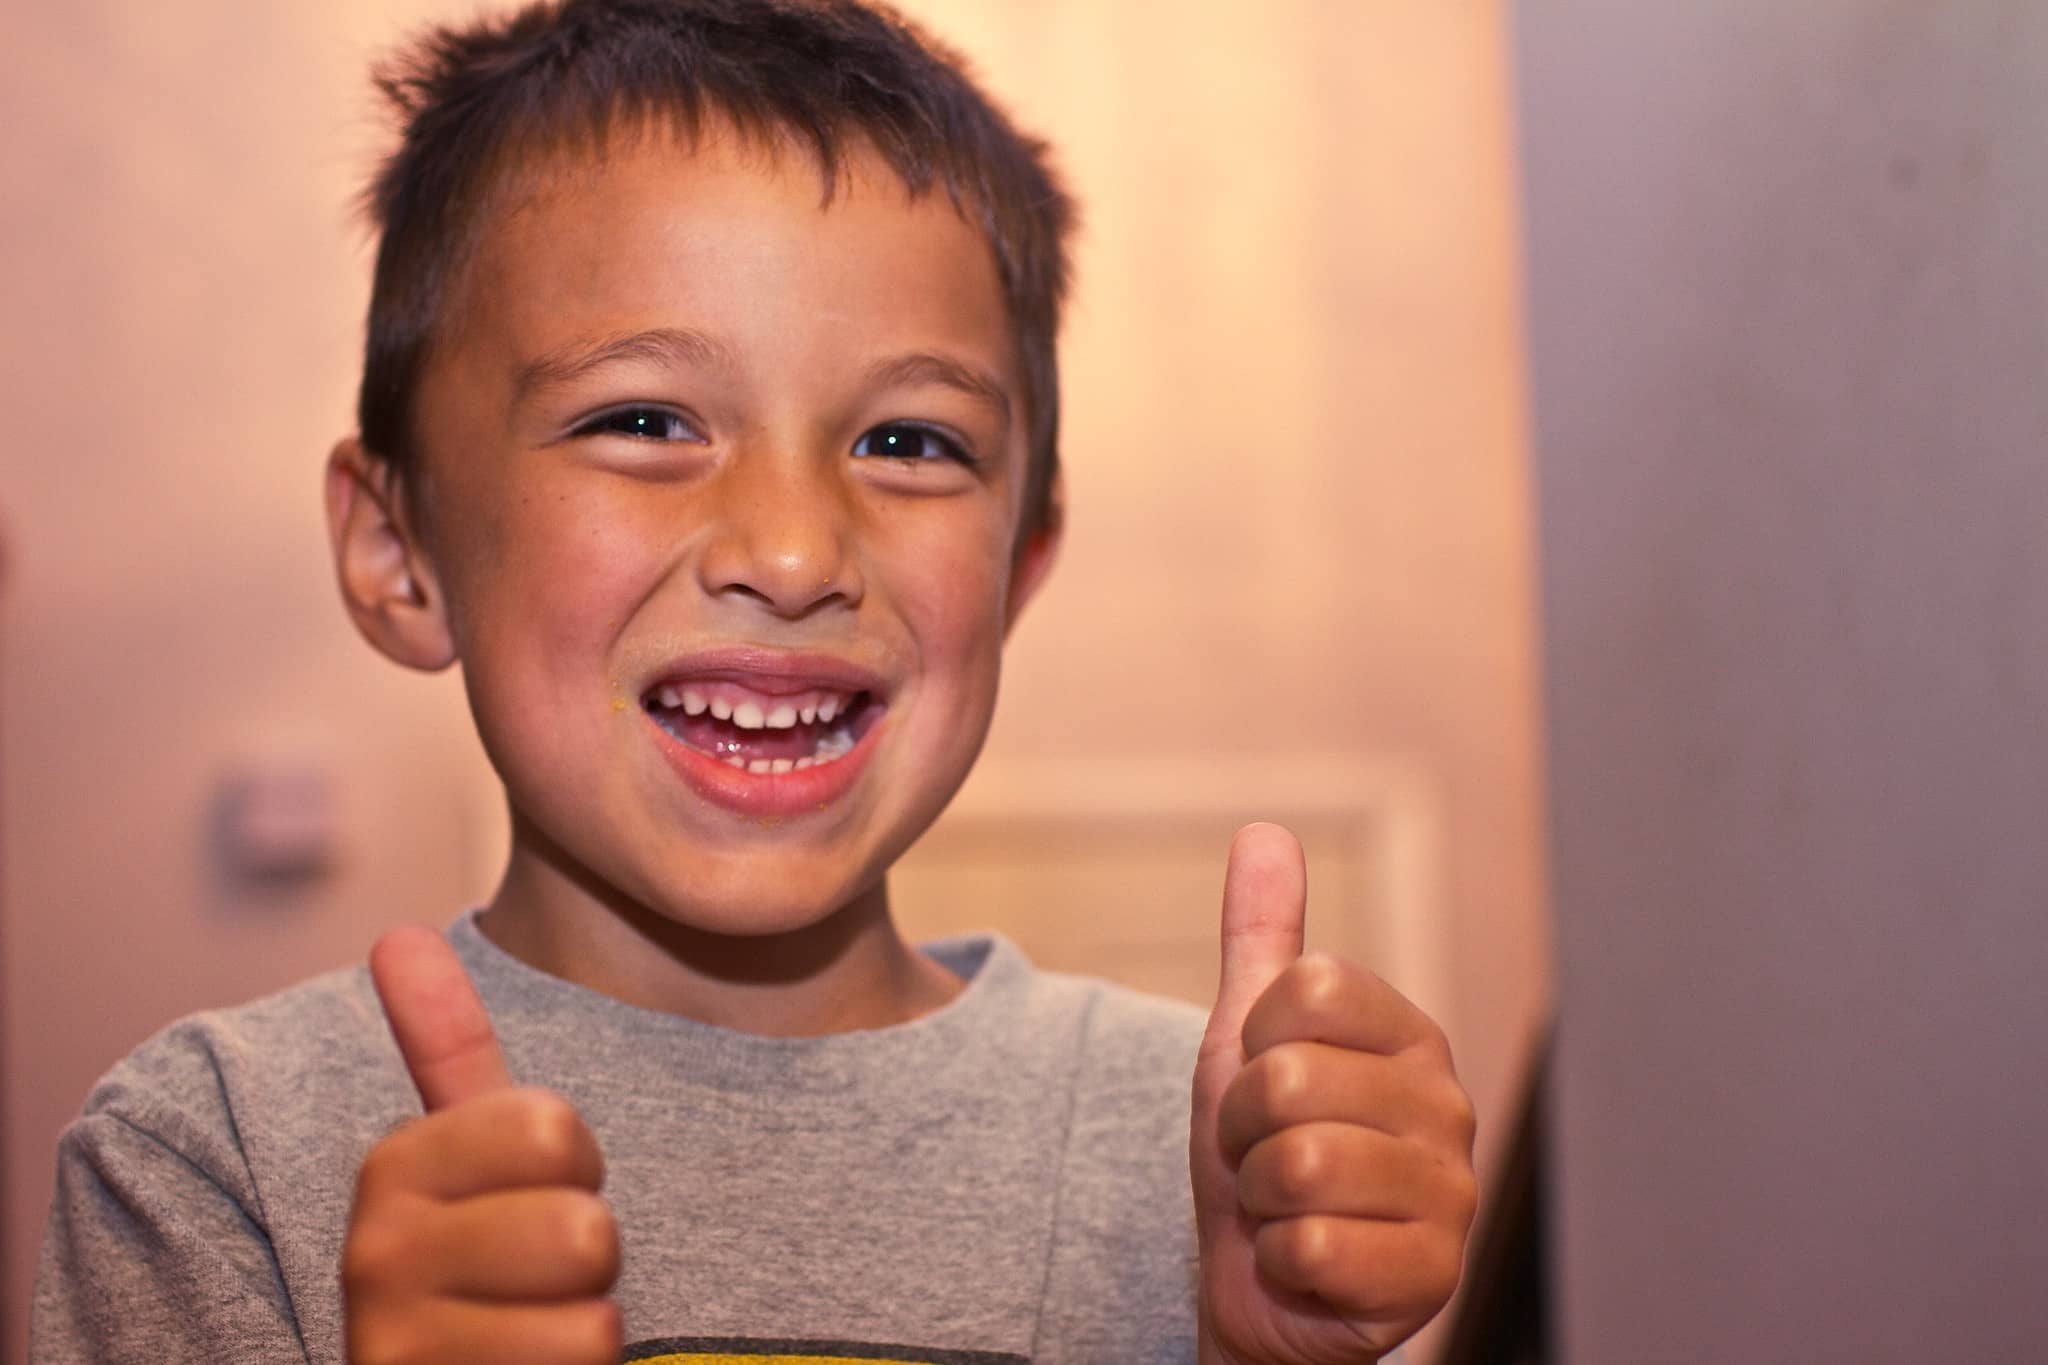 Child giving thumbs up